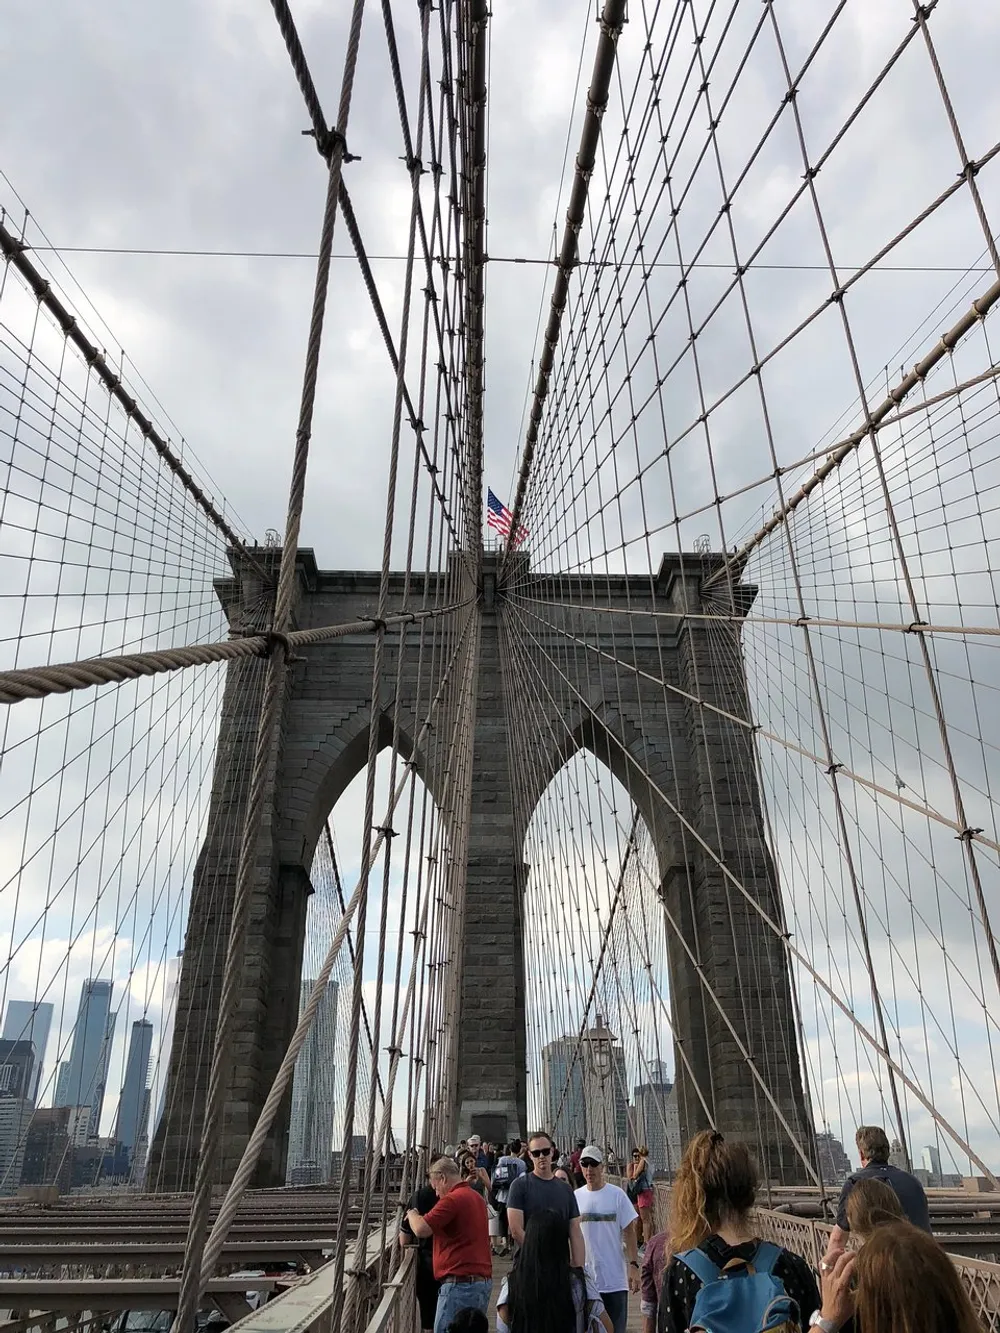 Visitors walk along the pedestrian pathway of the Brooklyn Bridge with its distinctive cable design framing the American flag and the New York City skyline in the distance